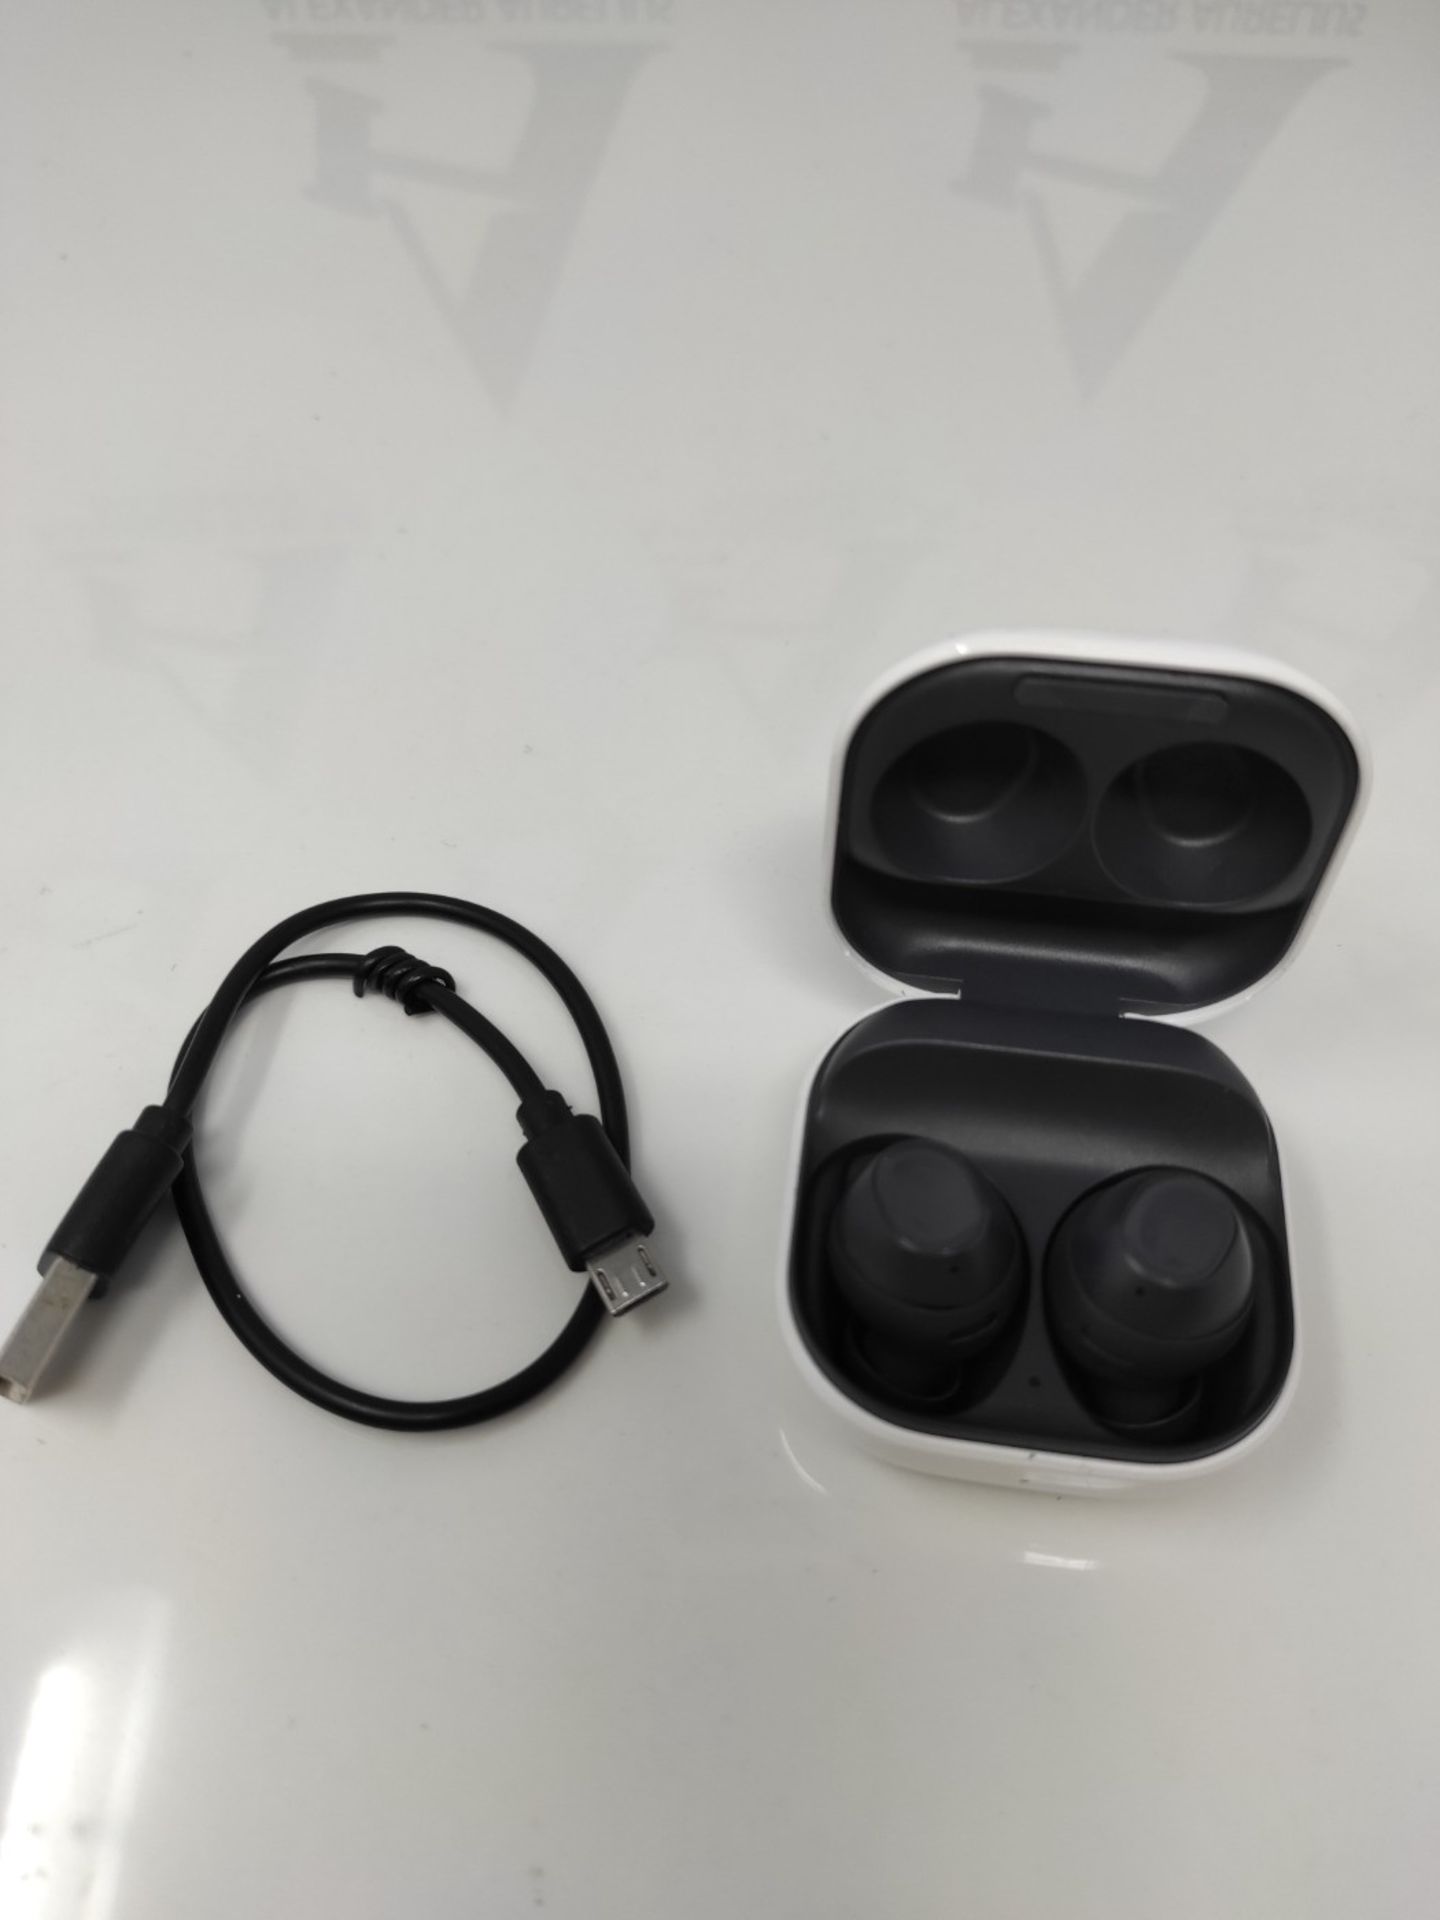 RRP £79.00 Samsung Galaxy Buds FE Wireless Earbuds, Active Noise Cancelling, Comfort Fit, 2 Year - Image 2 of 3